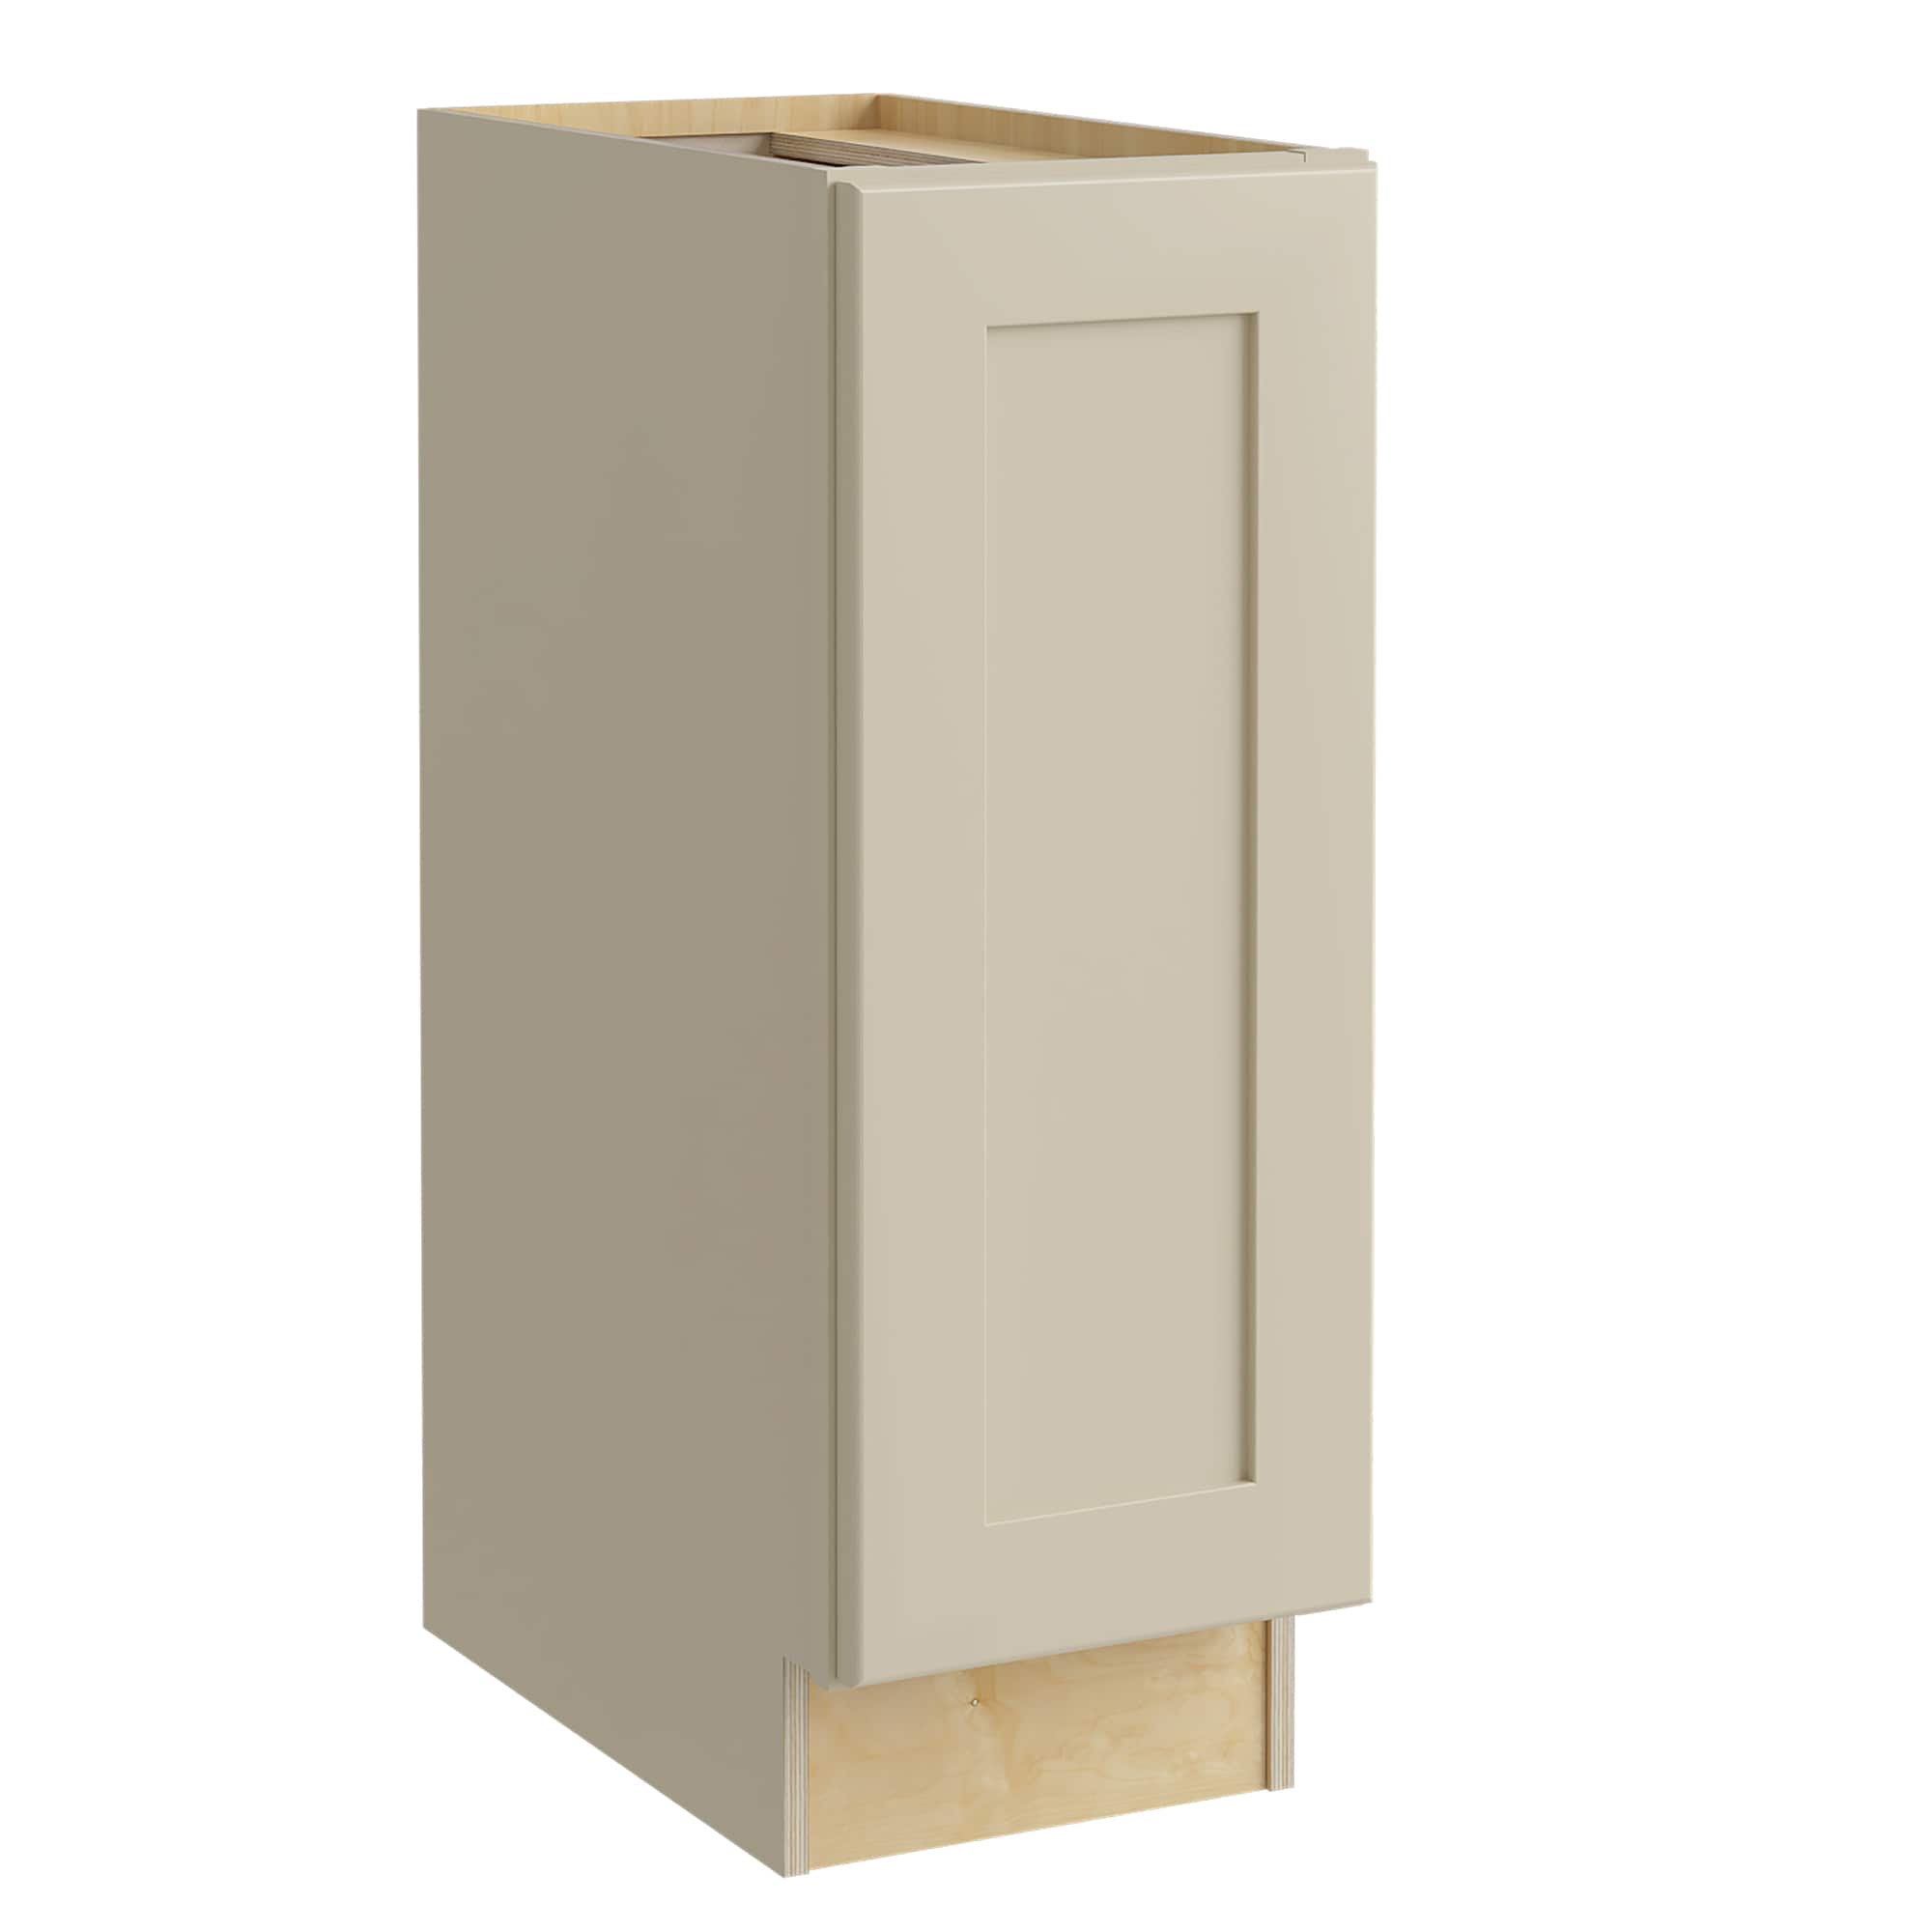 Luxxe Cabinetry 15-in W x 34.5-in H x 24-in D Norfolk Blended Cream Painted Door Base Fully Assembled Semi-custom Cabinet in Off-White | B15FHR-NBC